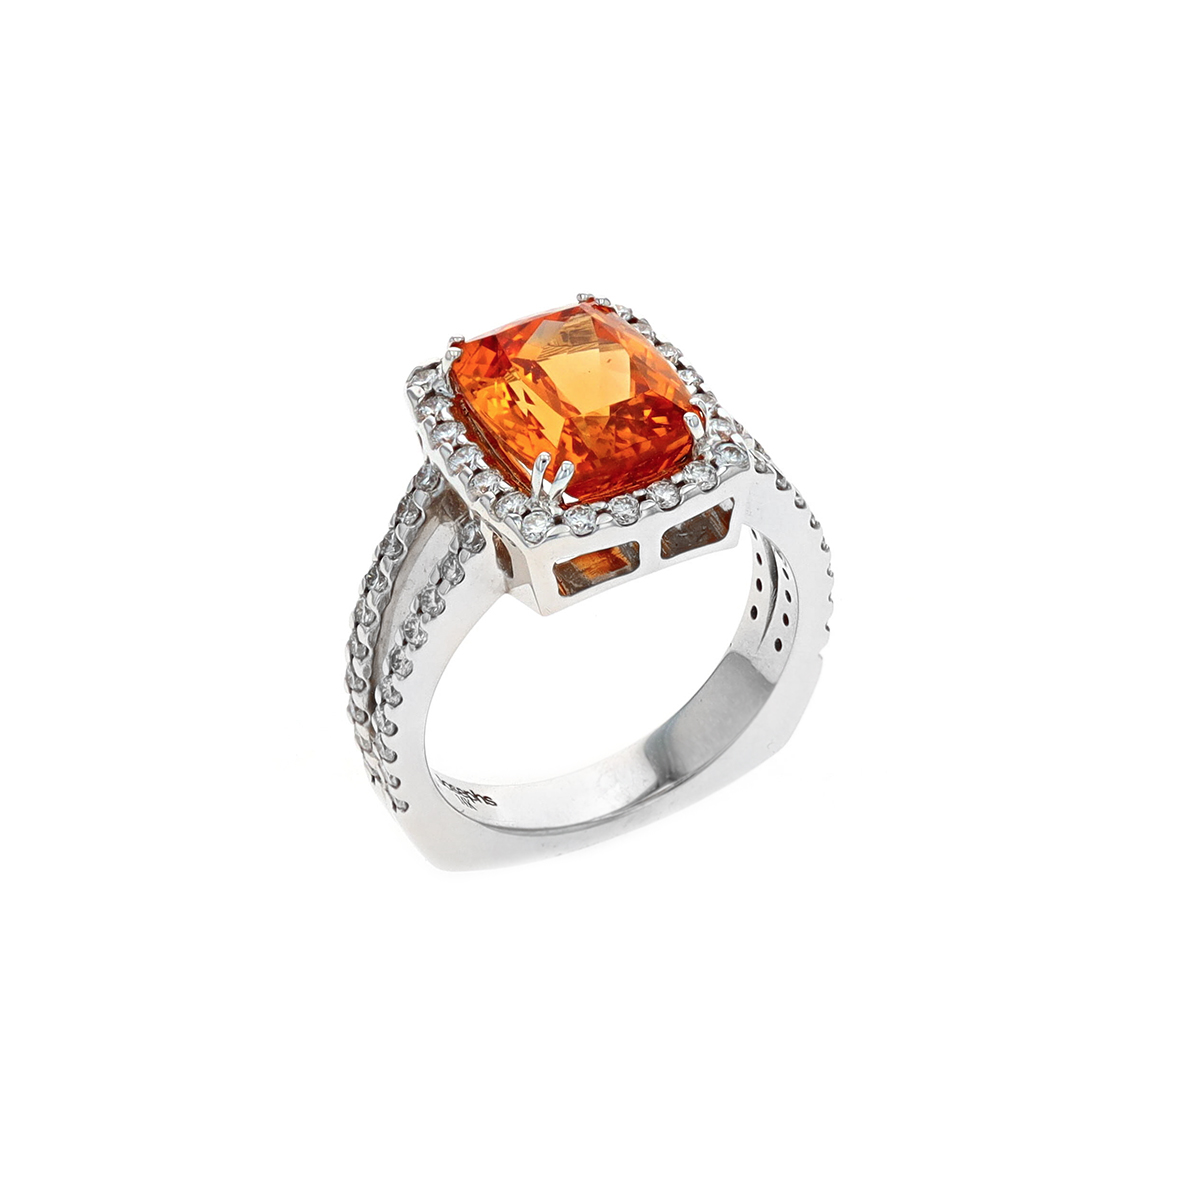 14K White Gold Imperial Topaz and Diamond Halo Ring